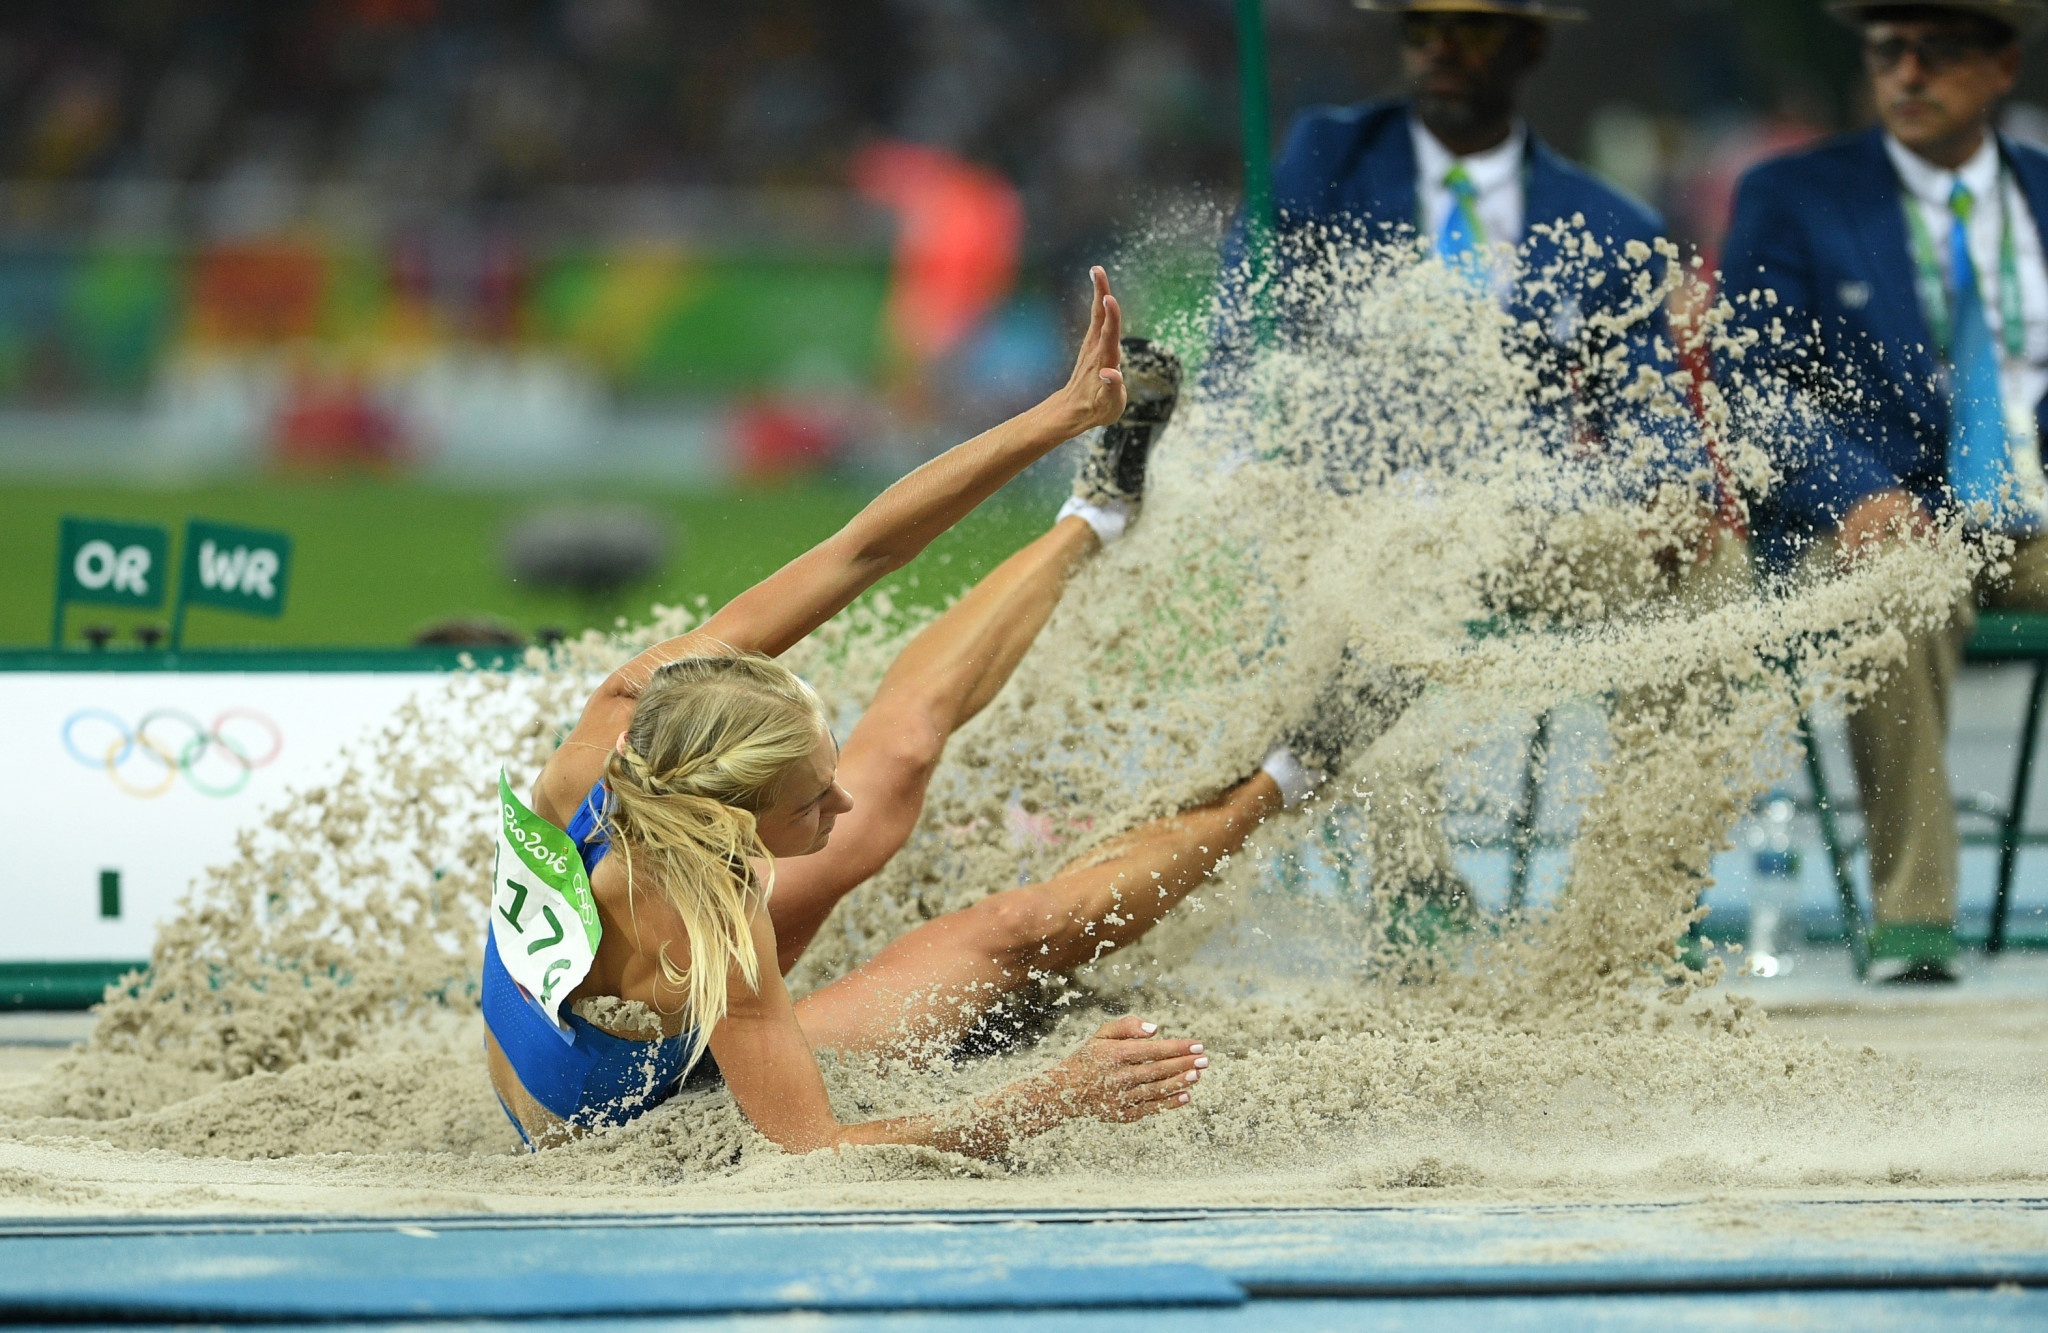 Russia's Darya Klishina competes in the Women's Long Jump Final during the athletics event at the Rio 2016 Olympic Games at the Olympic Stadium ©Getty Images